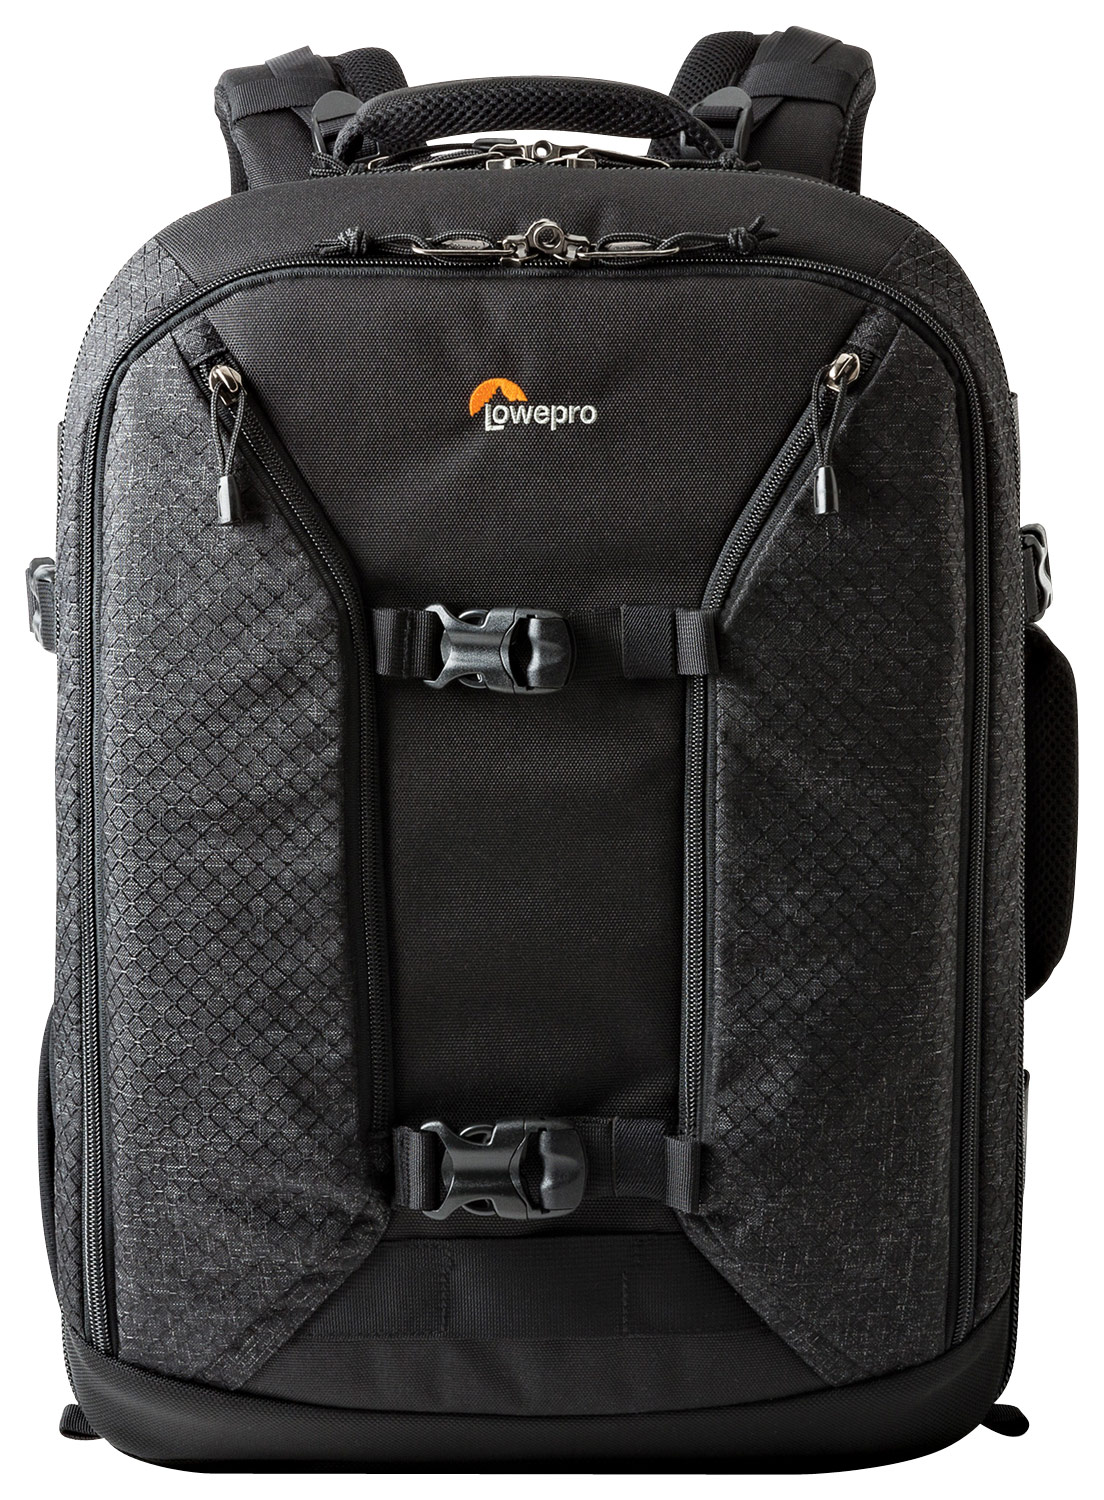 Rent to own Lowepro - Pro Runner BP 450 AW II Camera Backpack - Black